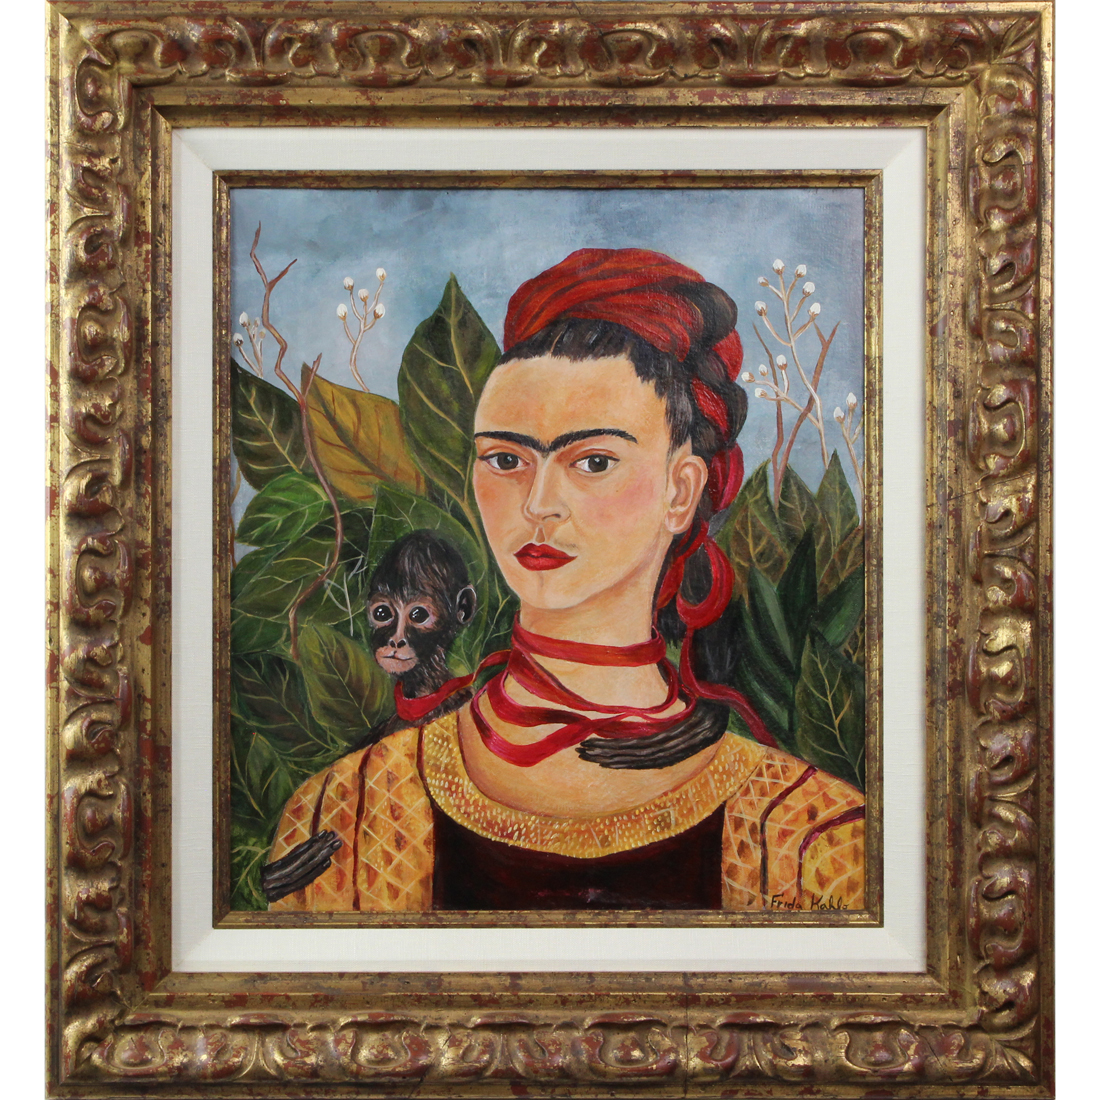 PAINTING AFTER FRIDA KAHLO After 3a1dcd